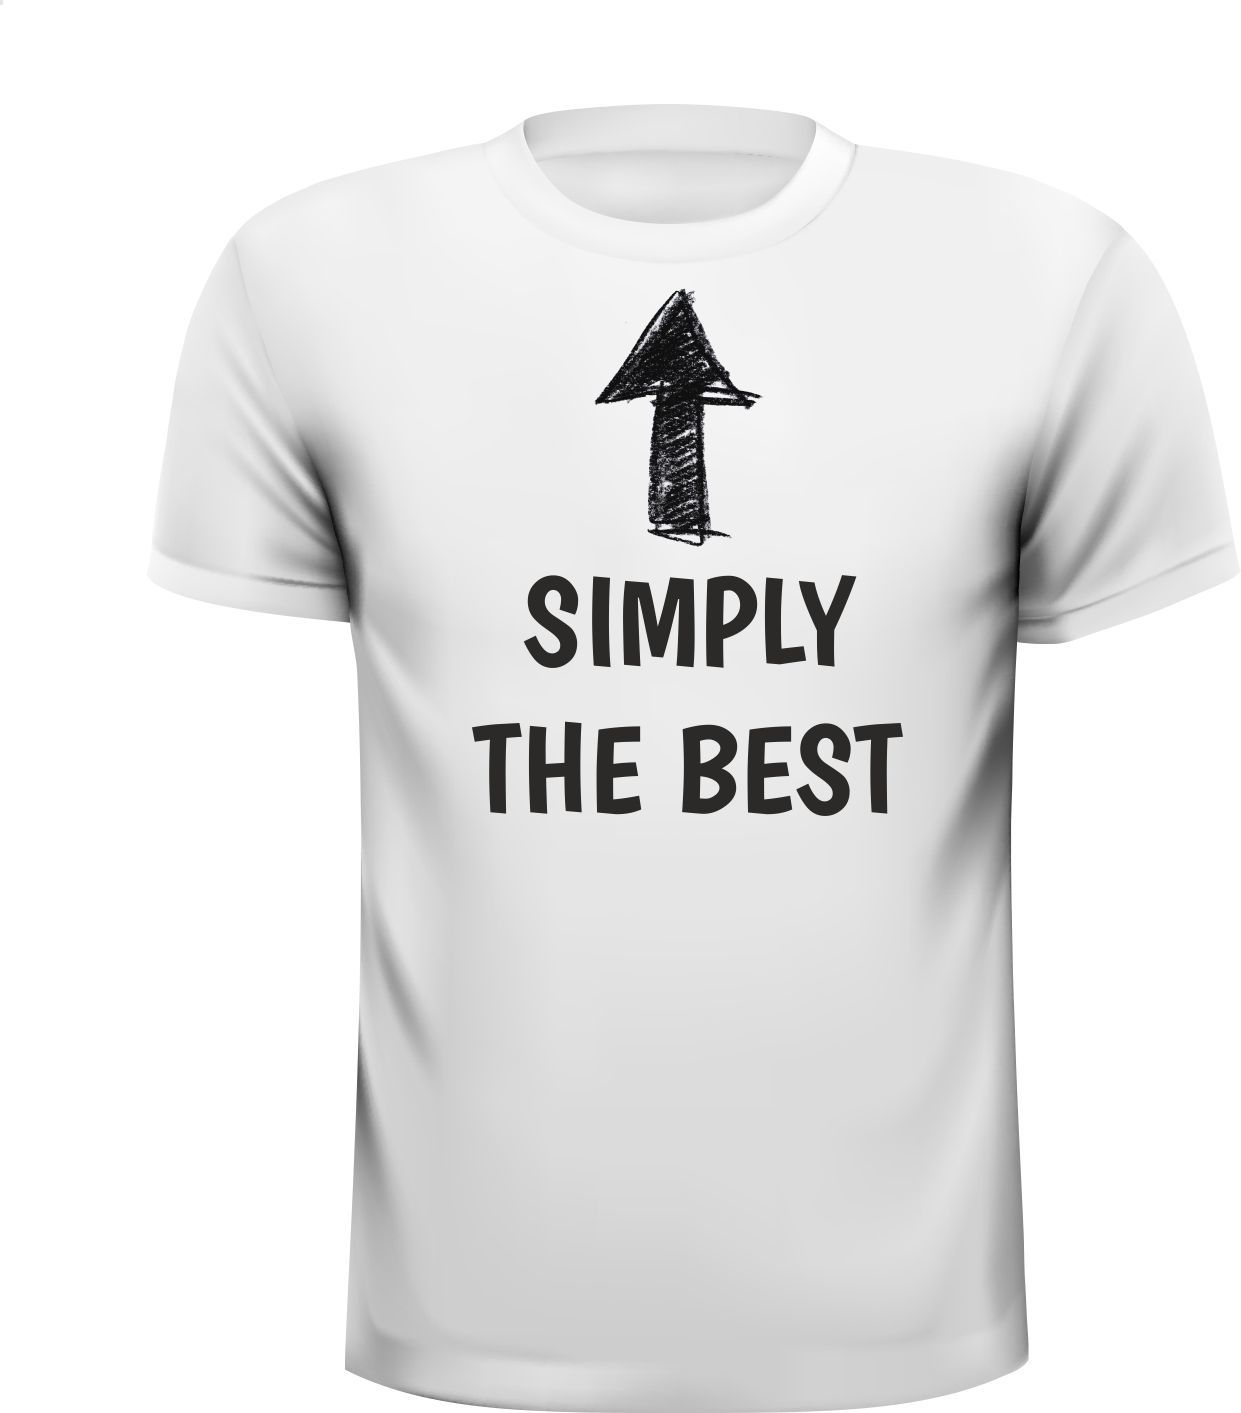 T-shirt simply the best